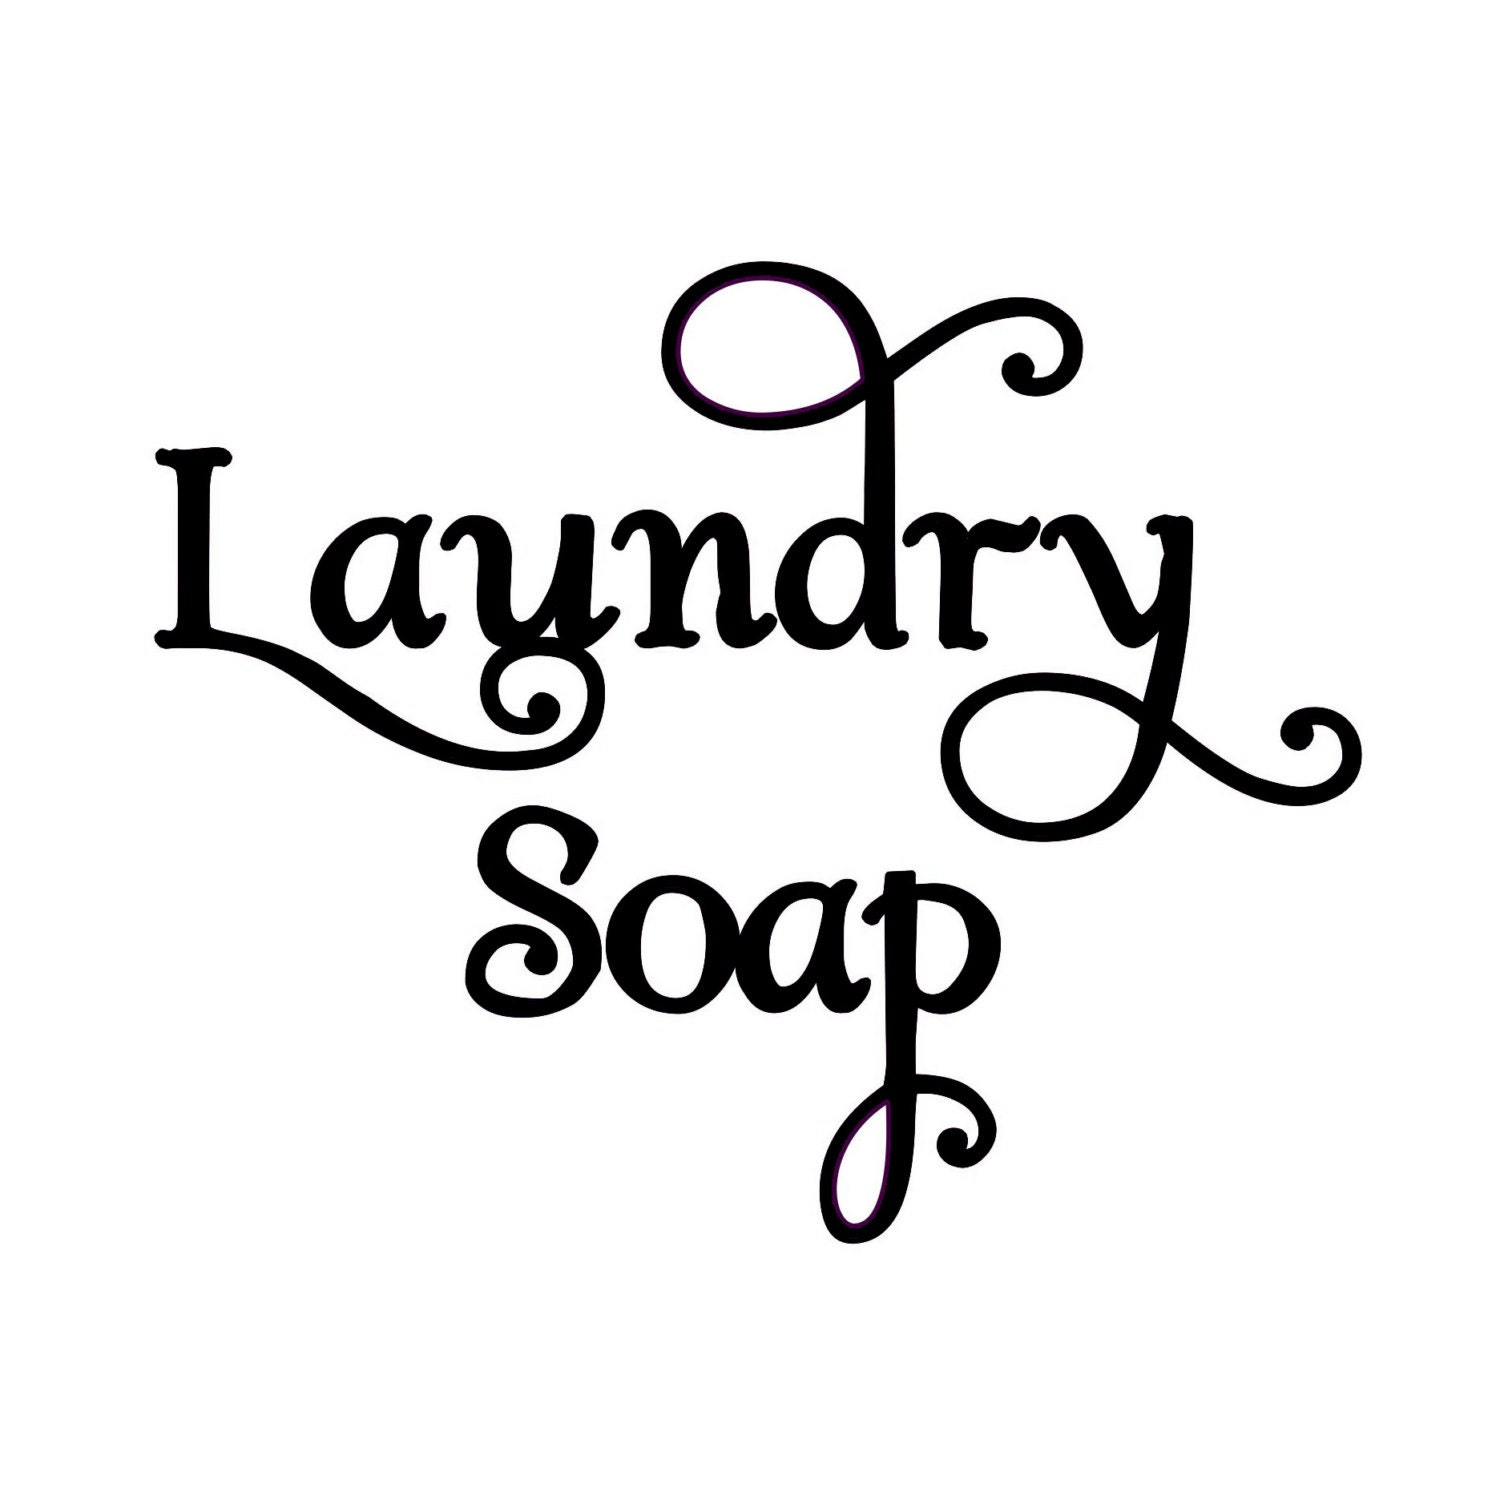 laundry-soap-label-vinyl-decal-sticker-home-clothes-washer